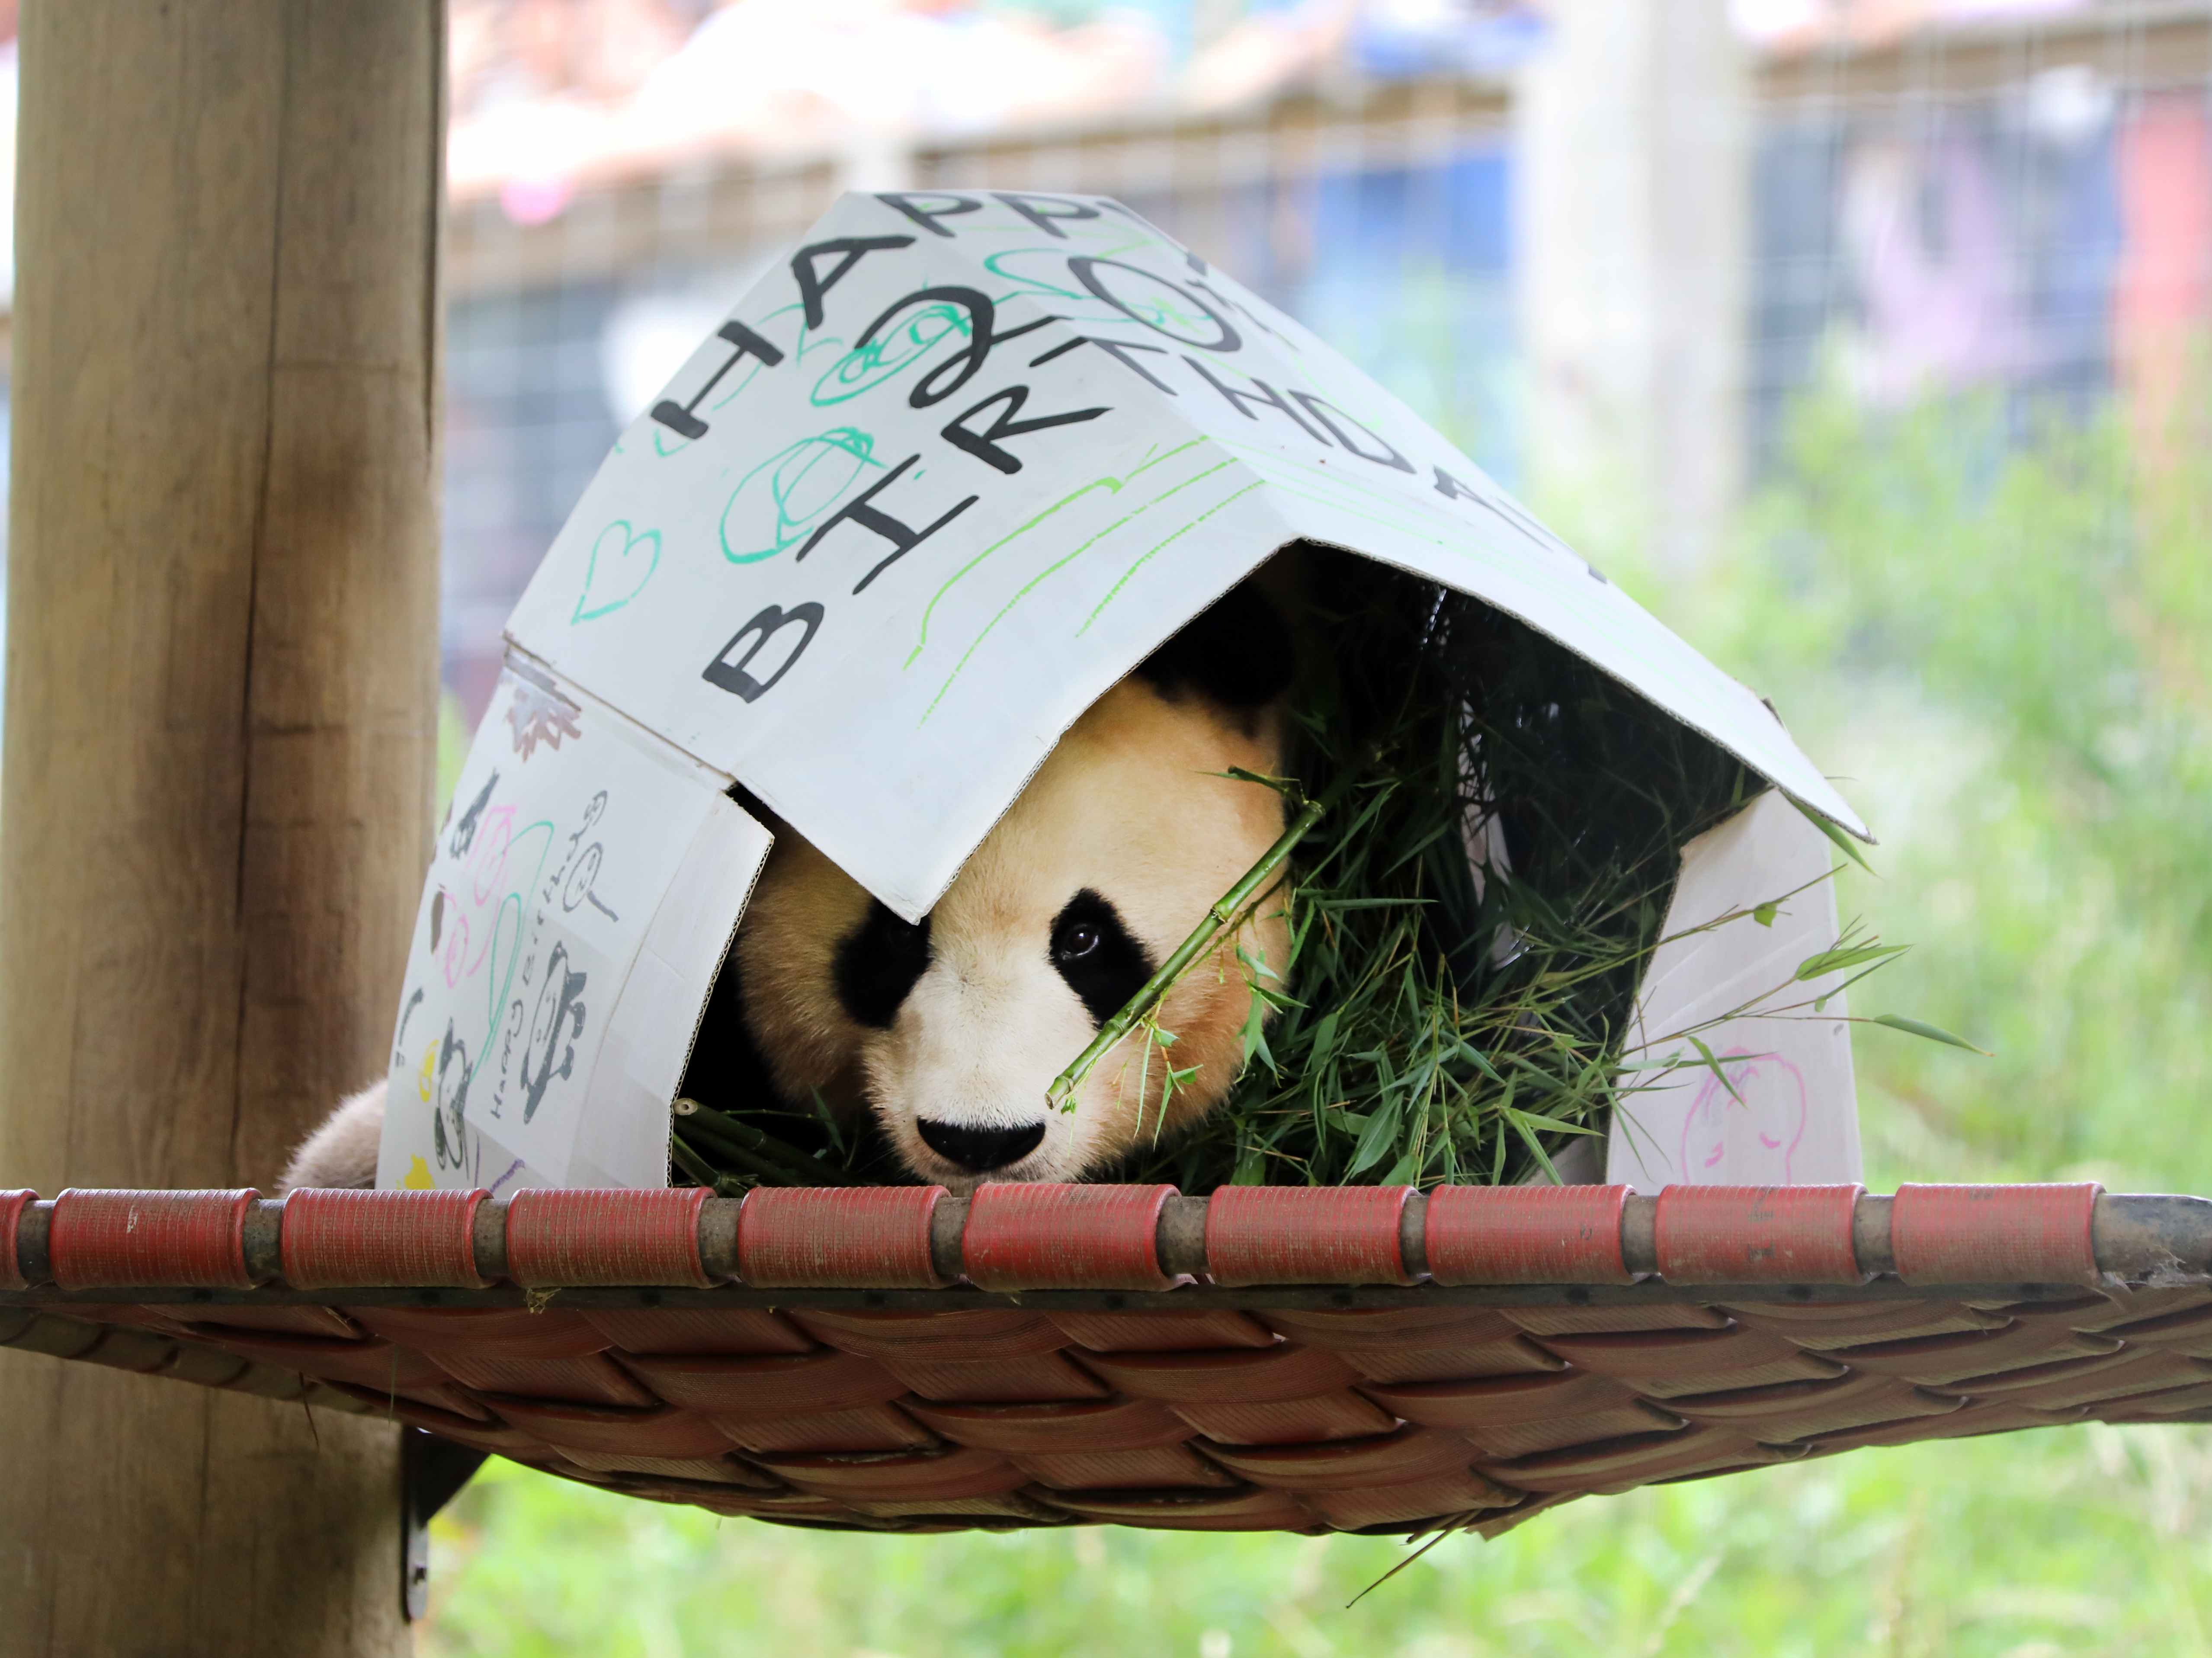 Giant panda Yang Guang playing in birthday box decorated by children supported by Edinburgh Children's Hospital Charity ECHC

Image: RHIORDAN LANGAN-FORTUNE 2023